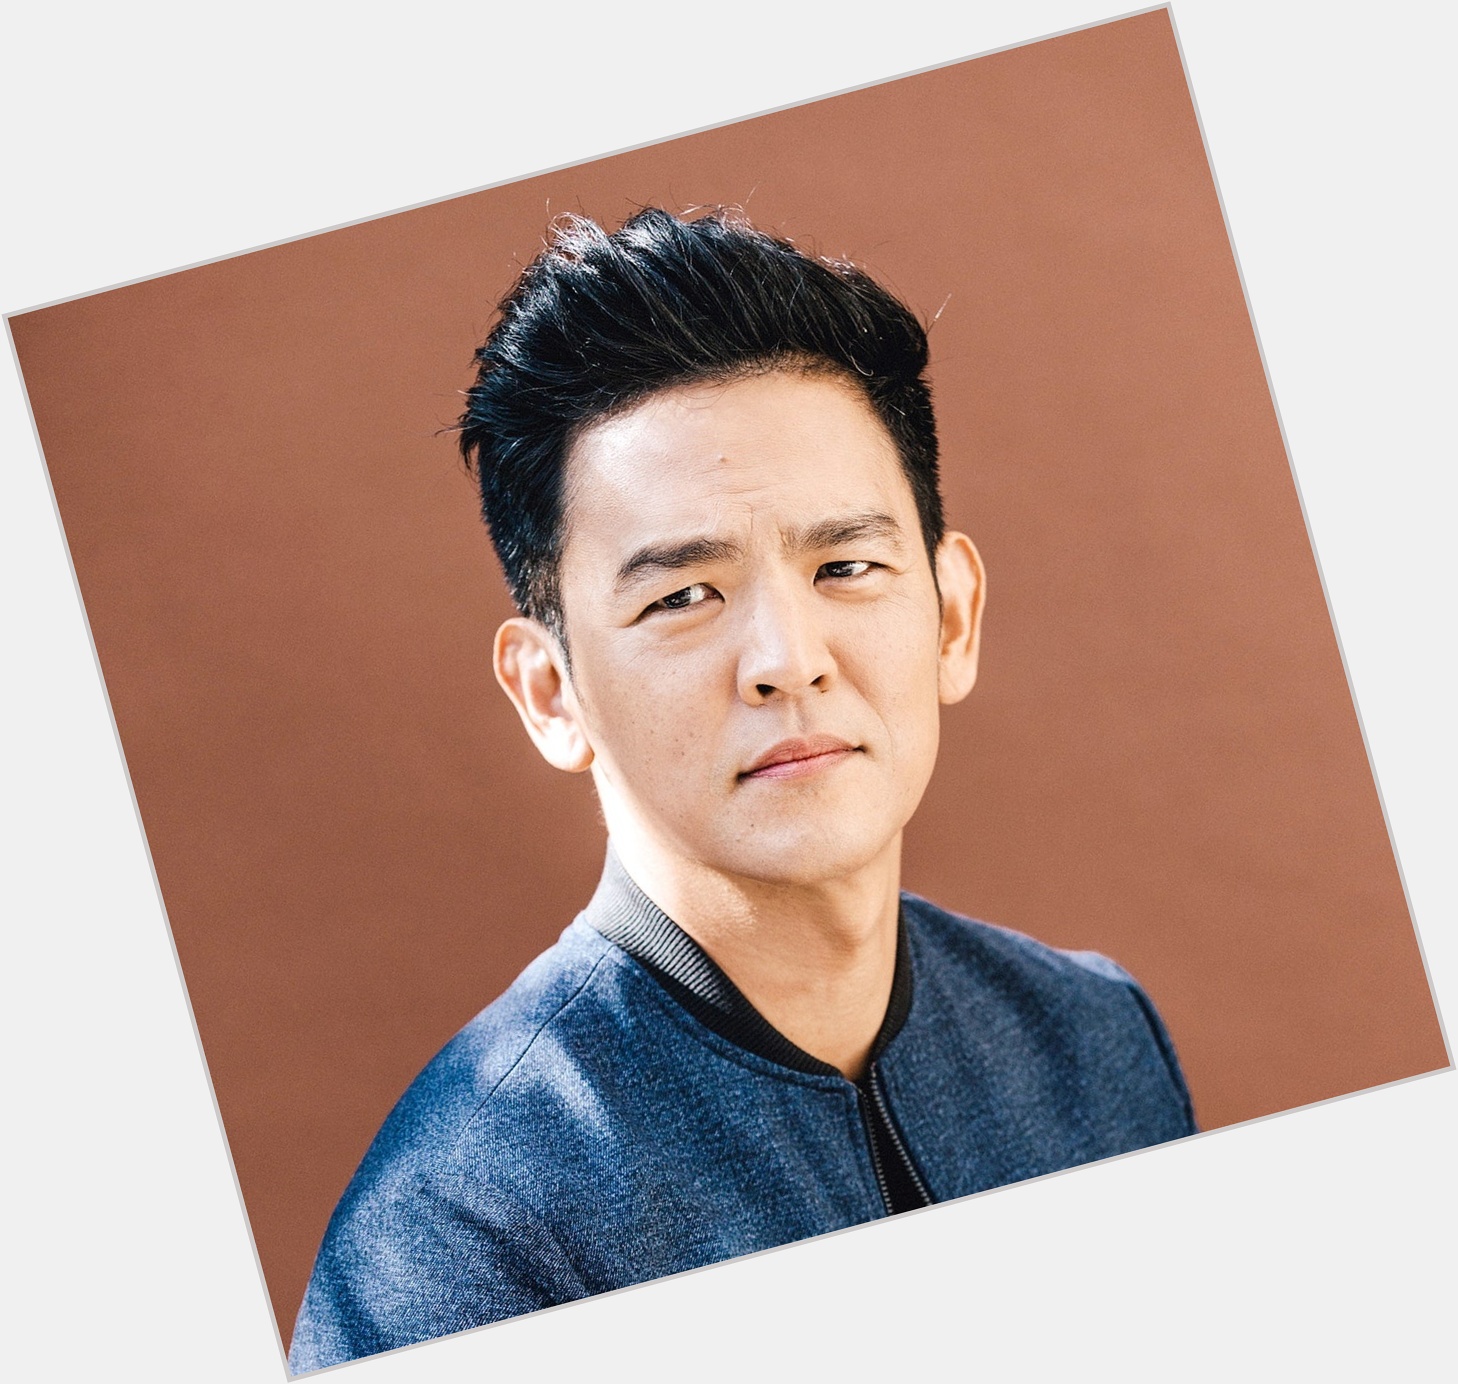 Let\s wish John Cho a happy 48th birthday!!

Which is your favorite performance from him? 